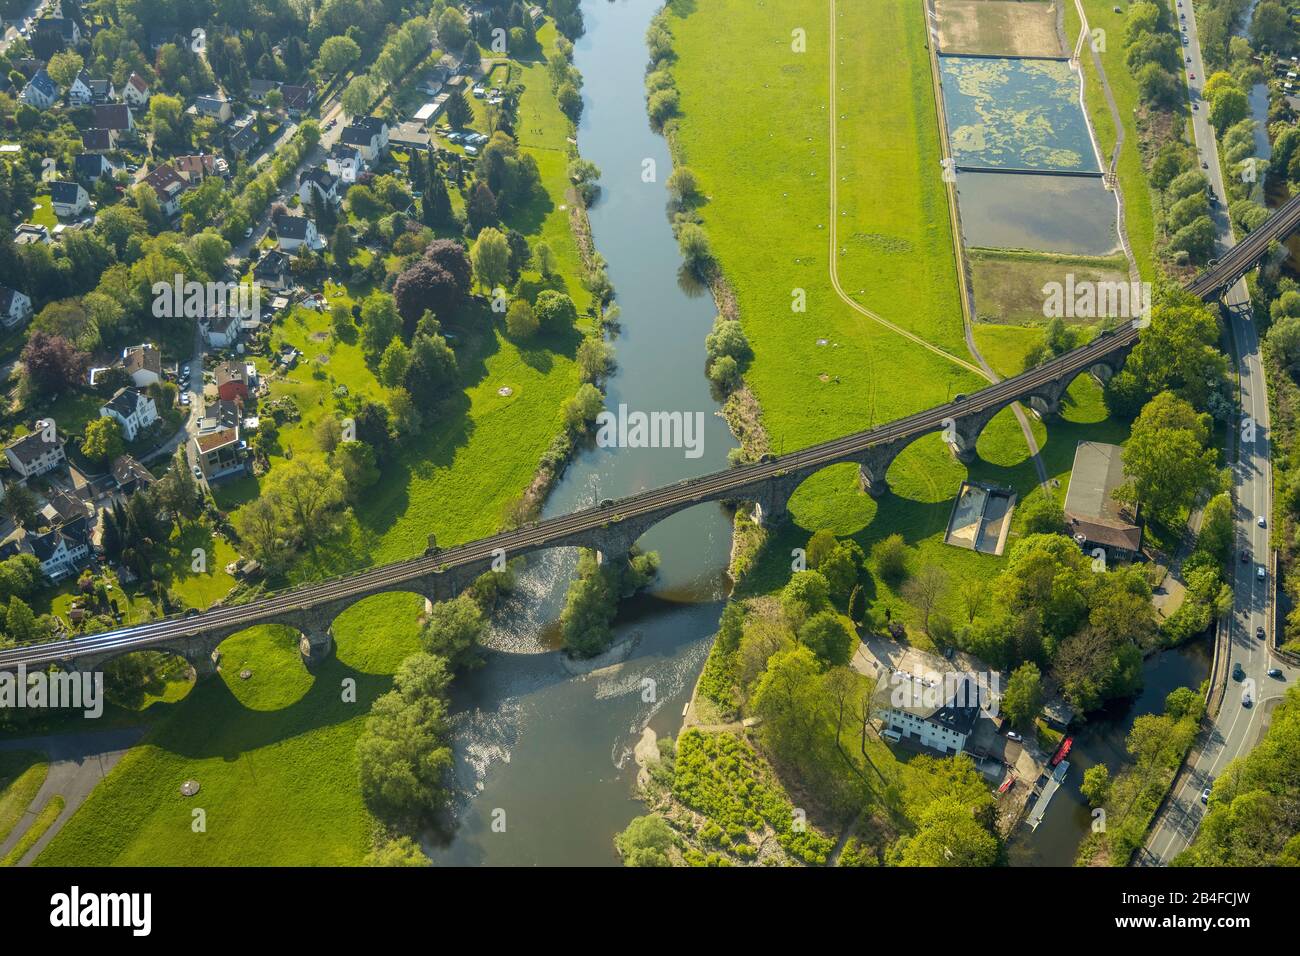 Aerial view of the Ruhr Viaduct in Witten, which spans the Ruhr as a railway bridge in Witten in the Ruhr area in the state of North Rhine-Westphalia, Germany. Ruhr Valley, Ruhrauen Stock Photo